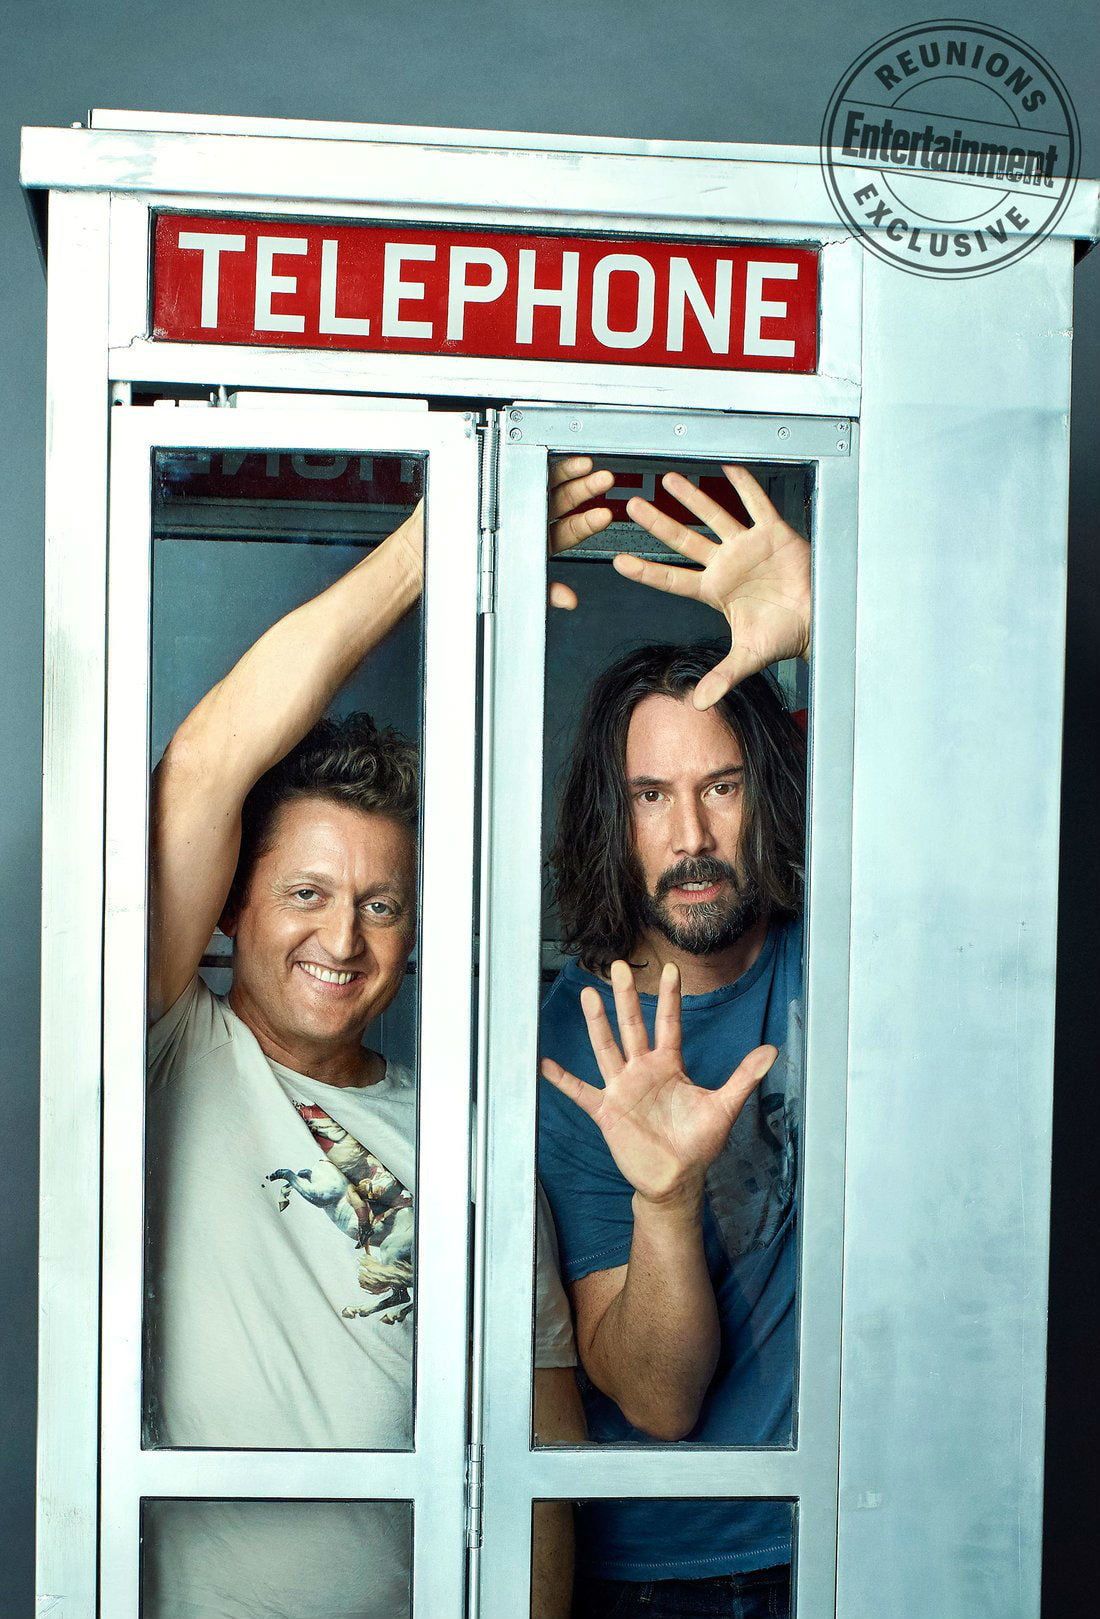 Bill and Ted Face the Music: Everything We Know So Far